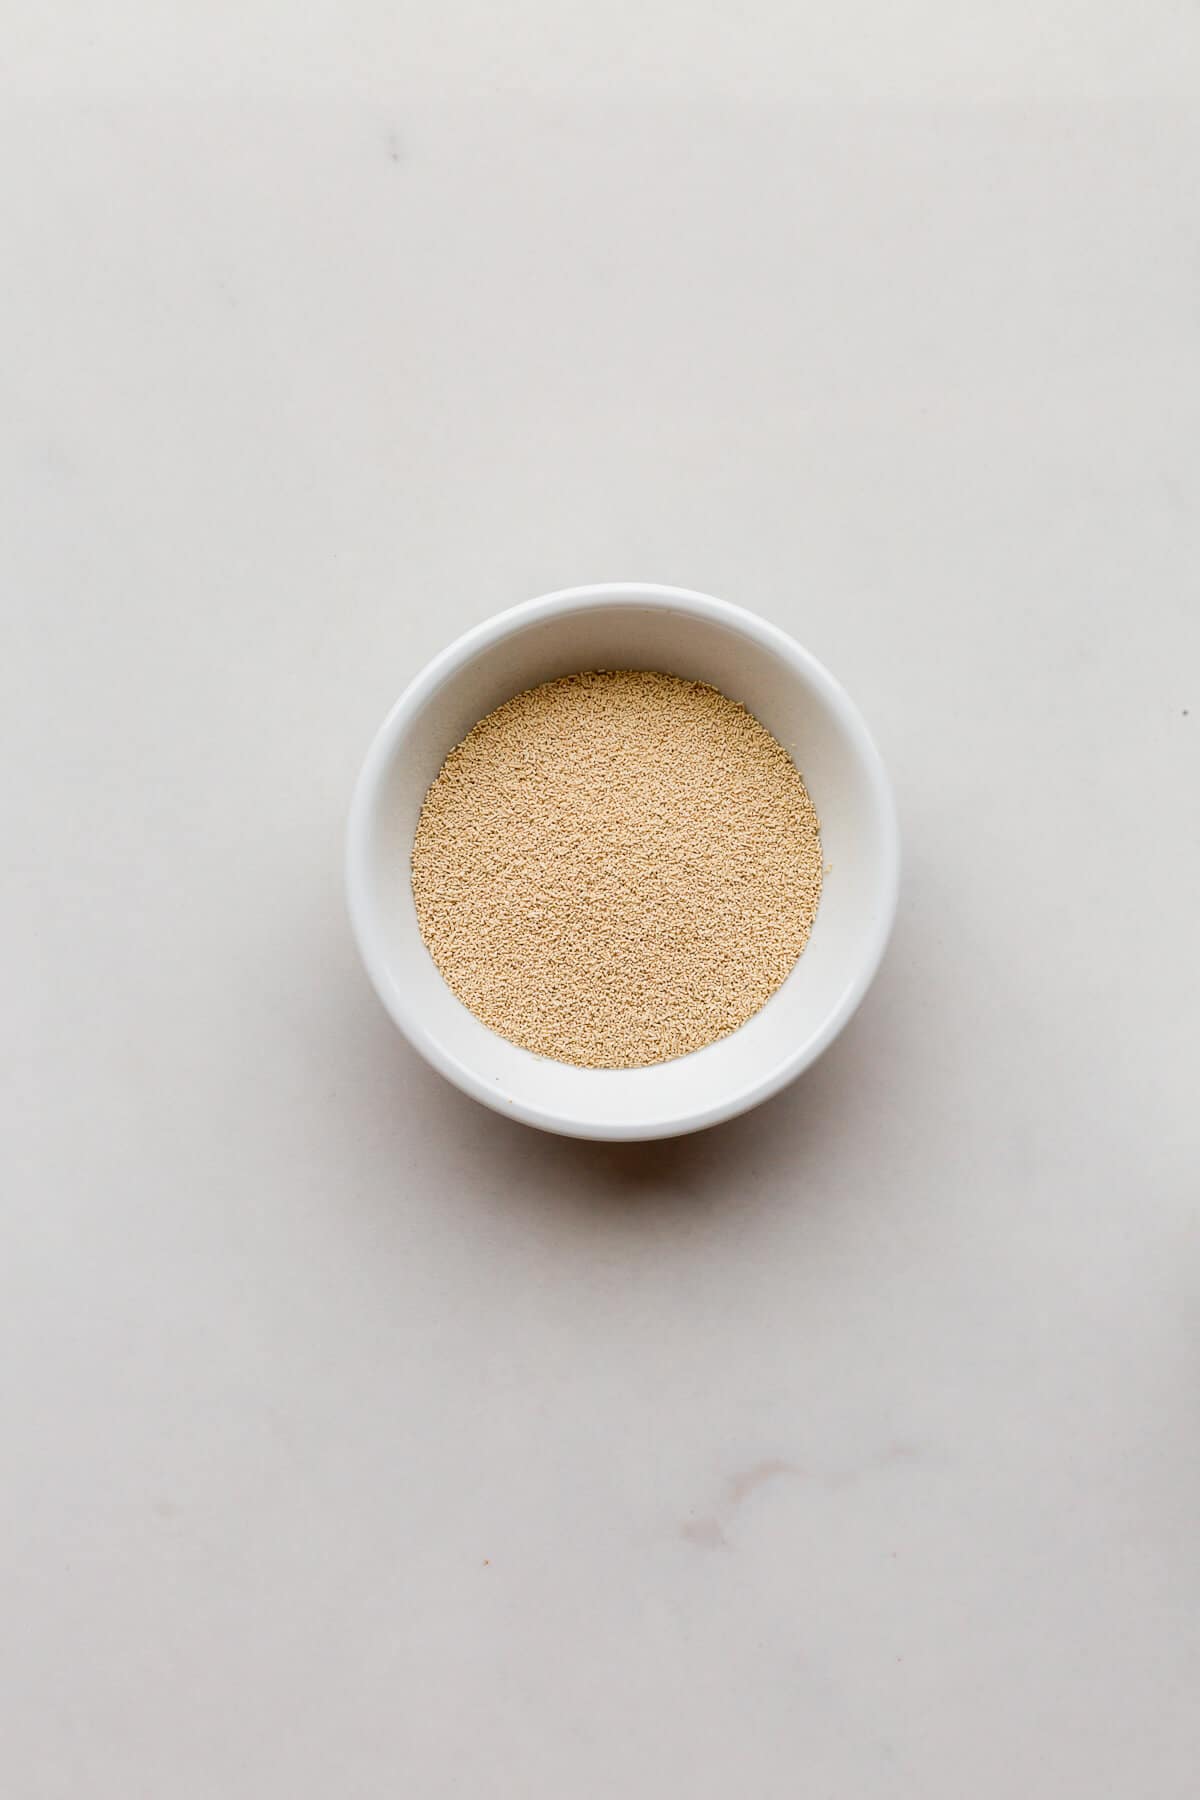 A small bowl of rapid rise dry yeast, enough to make a loaf of bread.